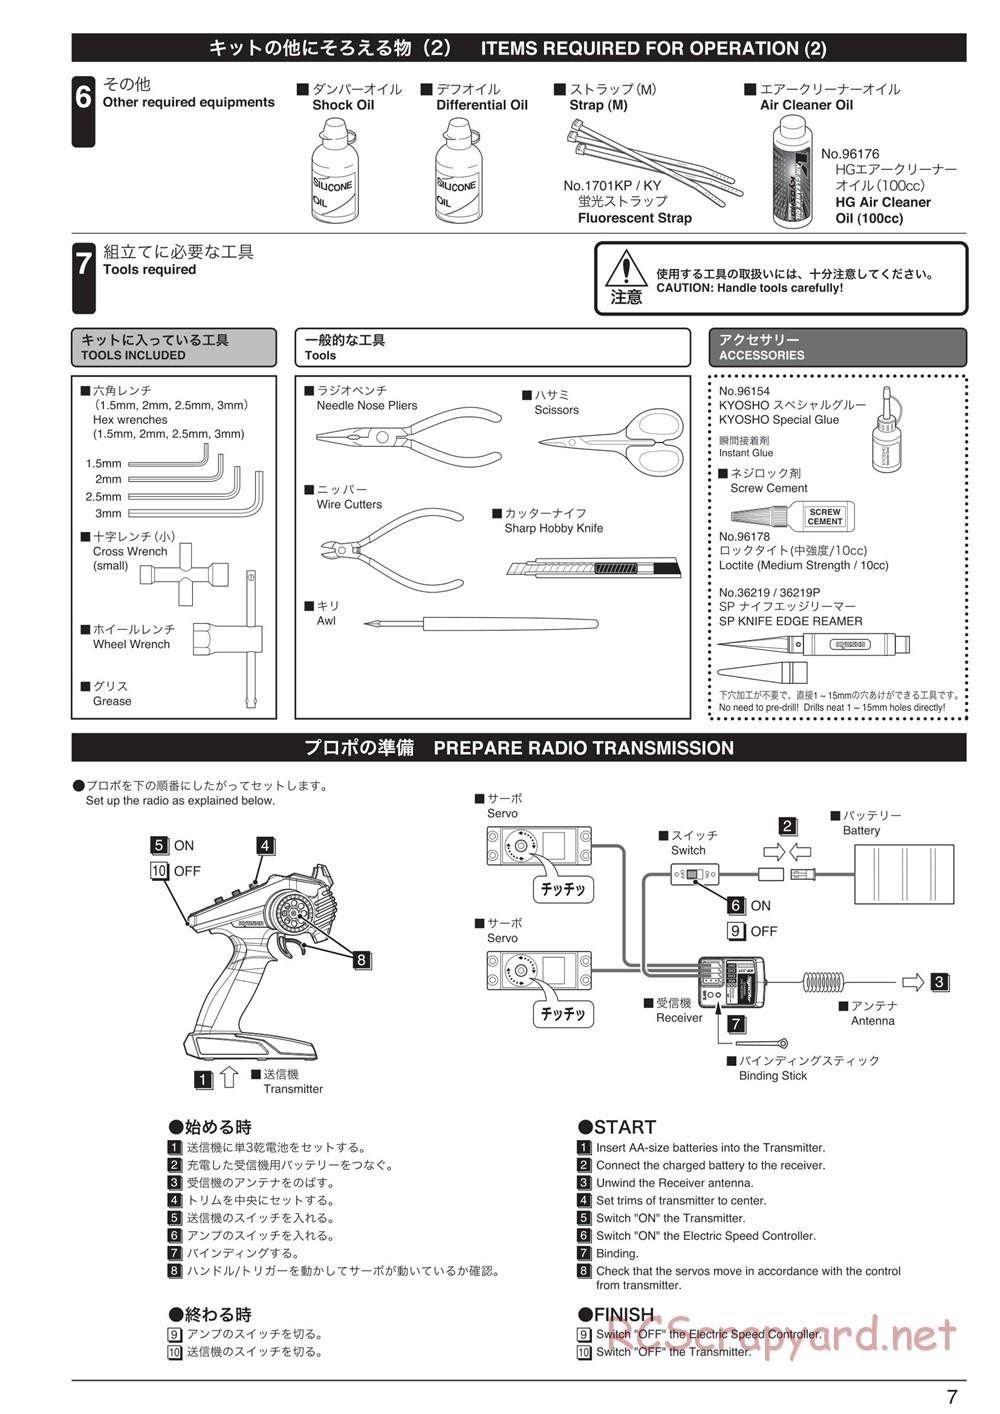 Kyosho - Inferno MP9 TKI4 10th Anniversary Special Edition - Manual - Page 7